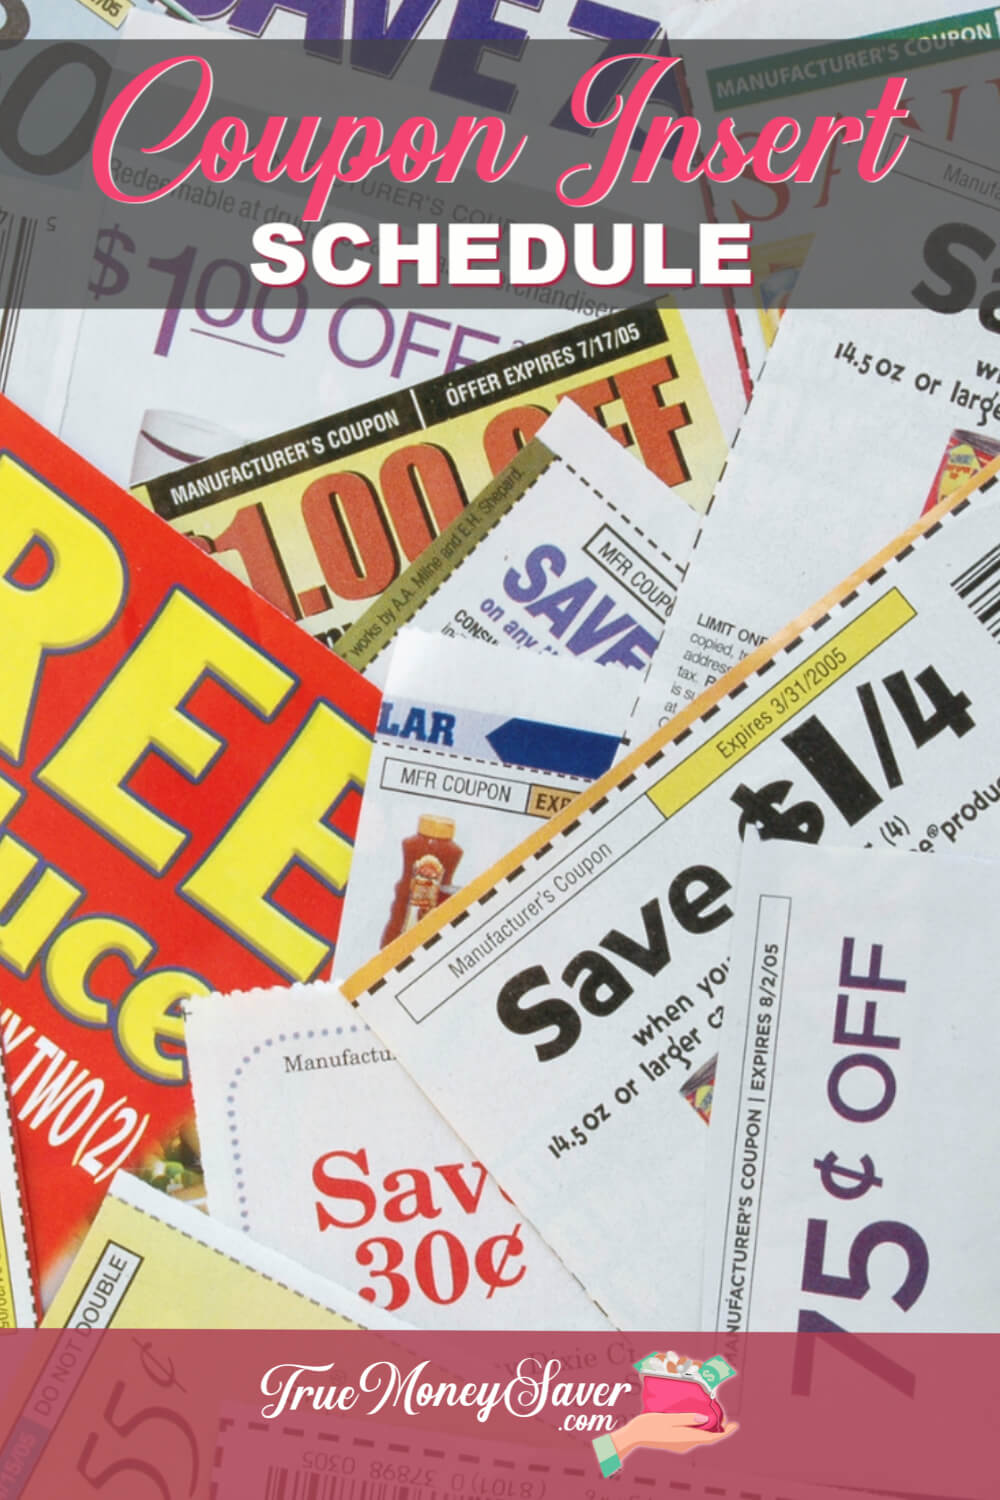 2019 Coupon Insert Schedule